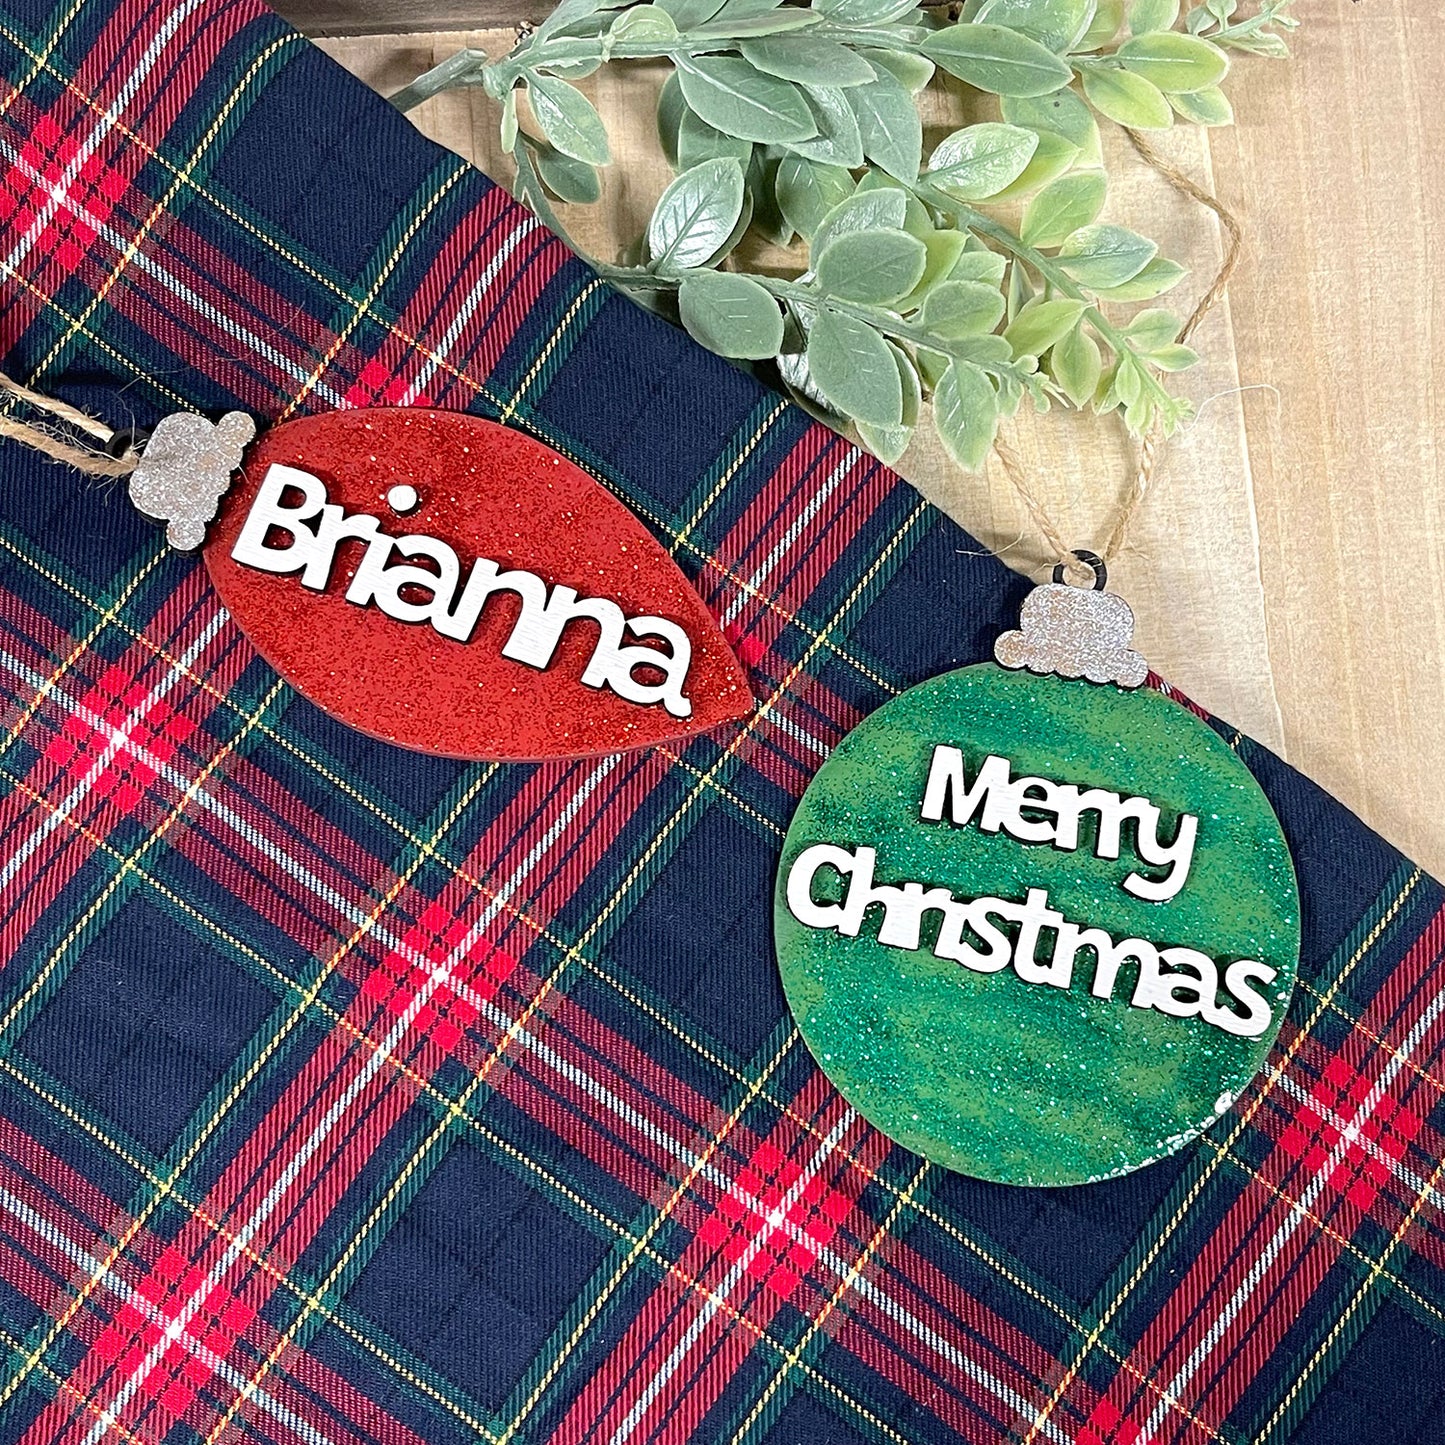 Personalized Christmas Ornaments or Stocking Tags (Set of 2)